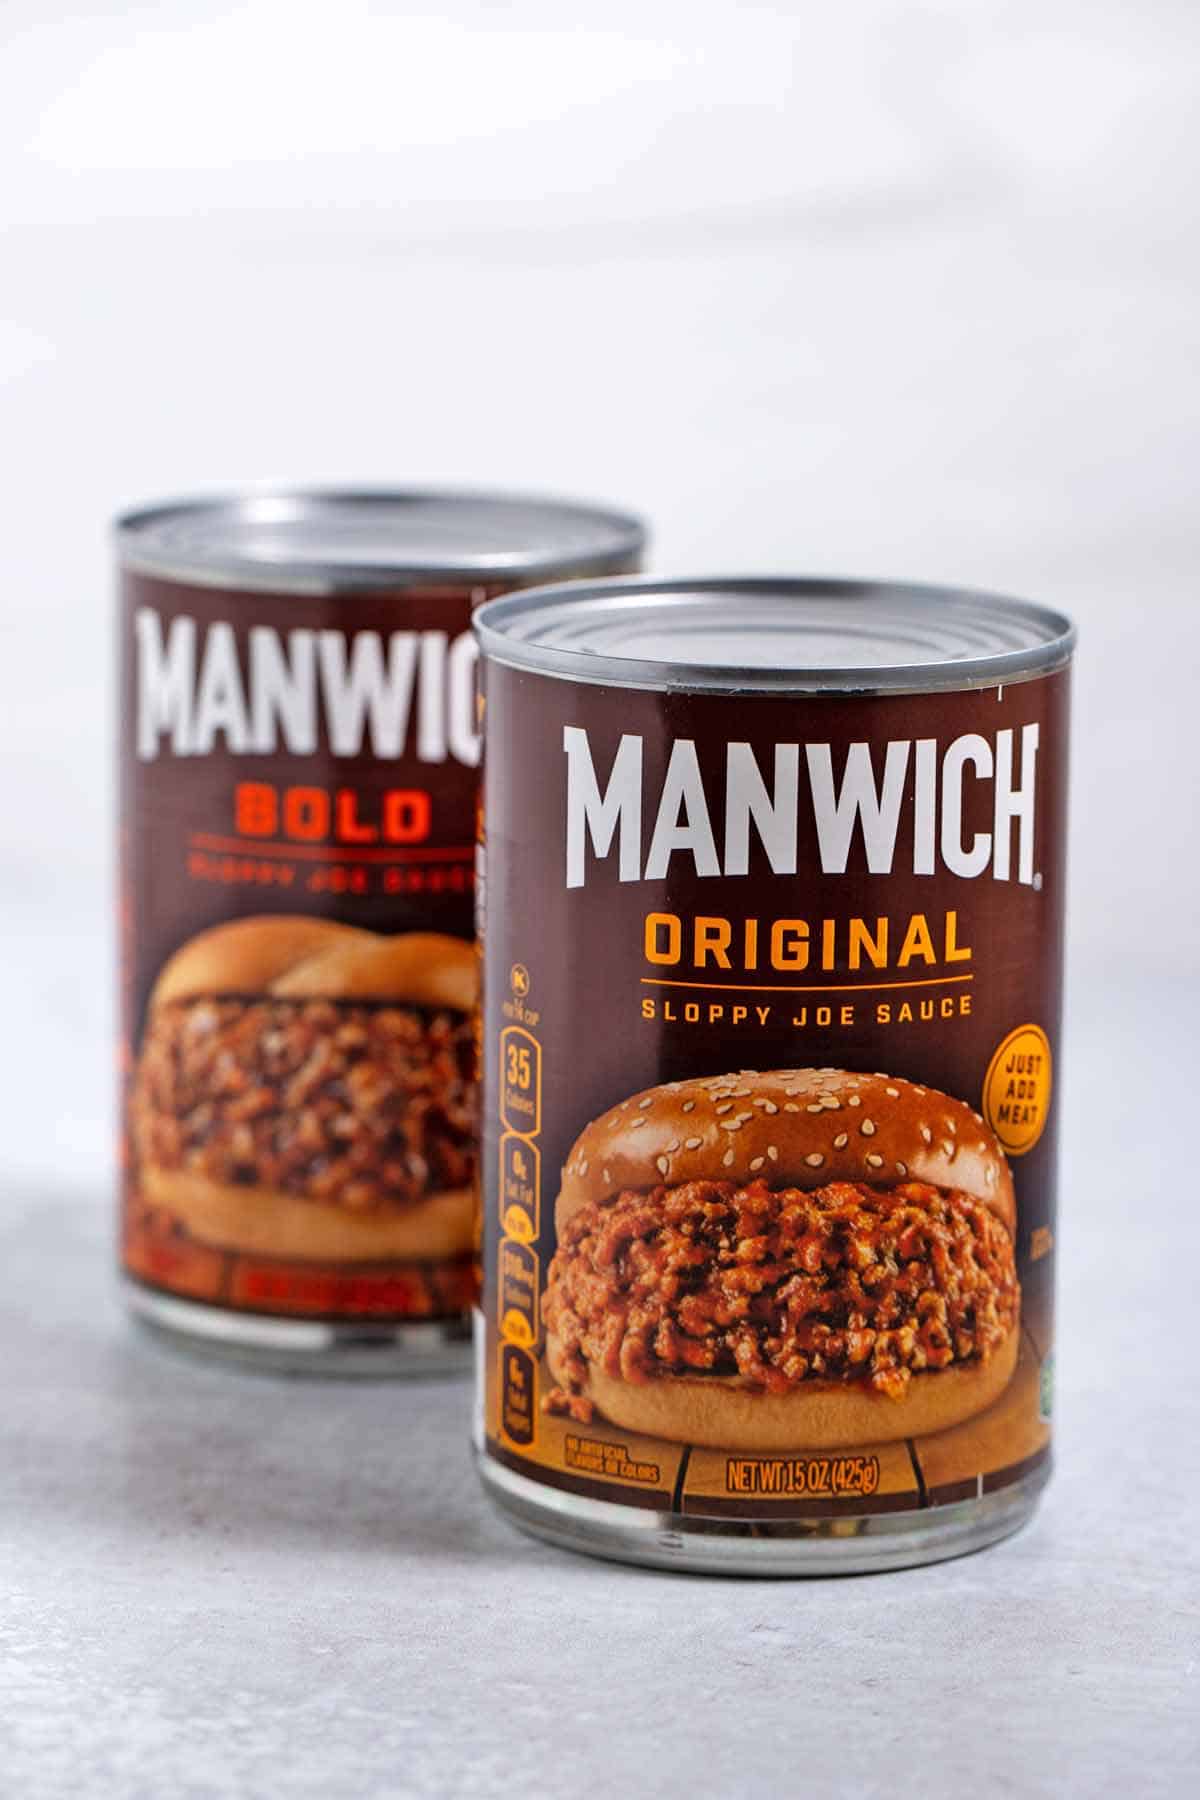 Can of original Manwich and can of bold Manwich.